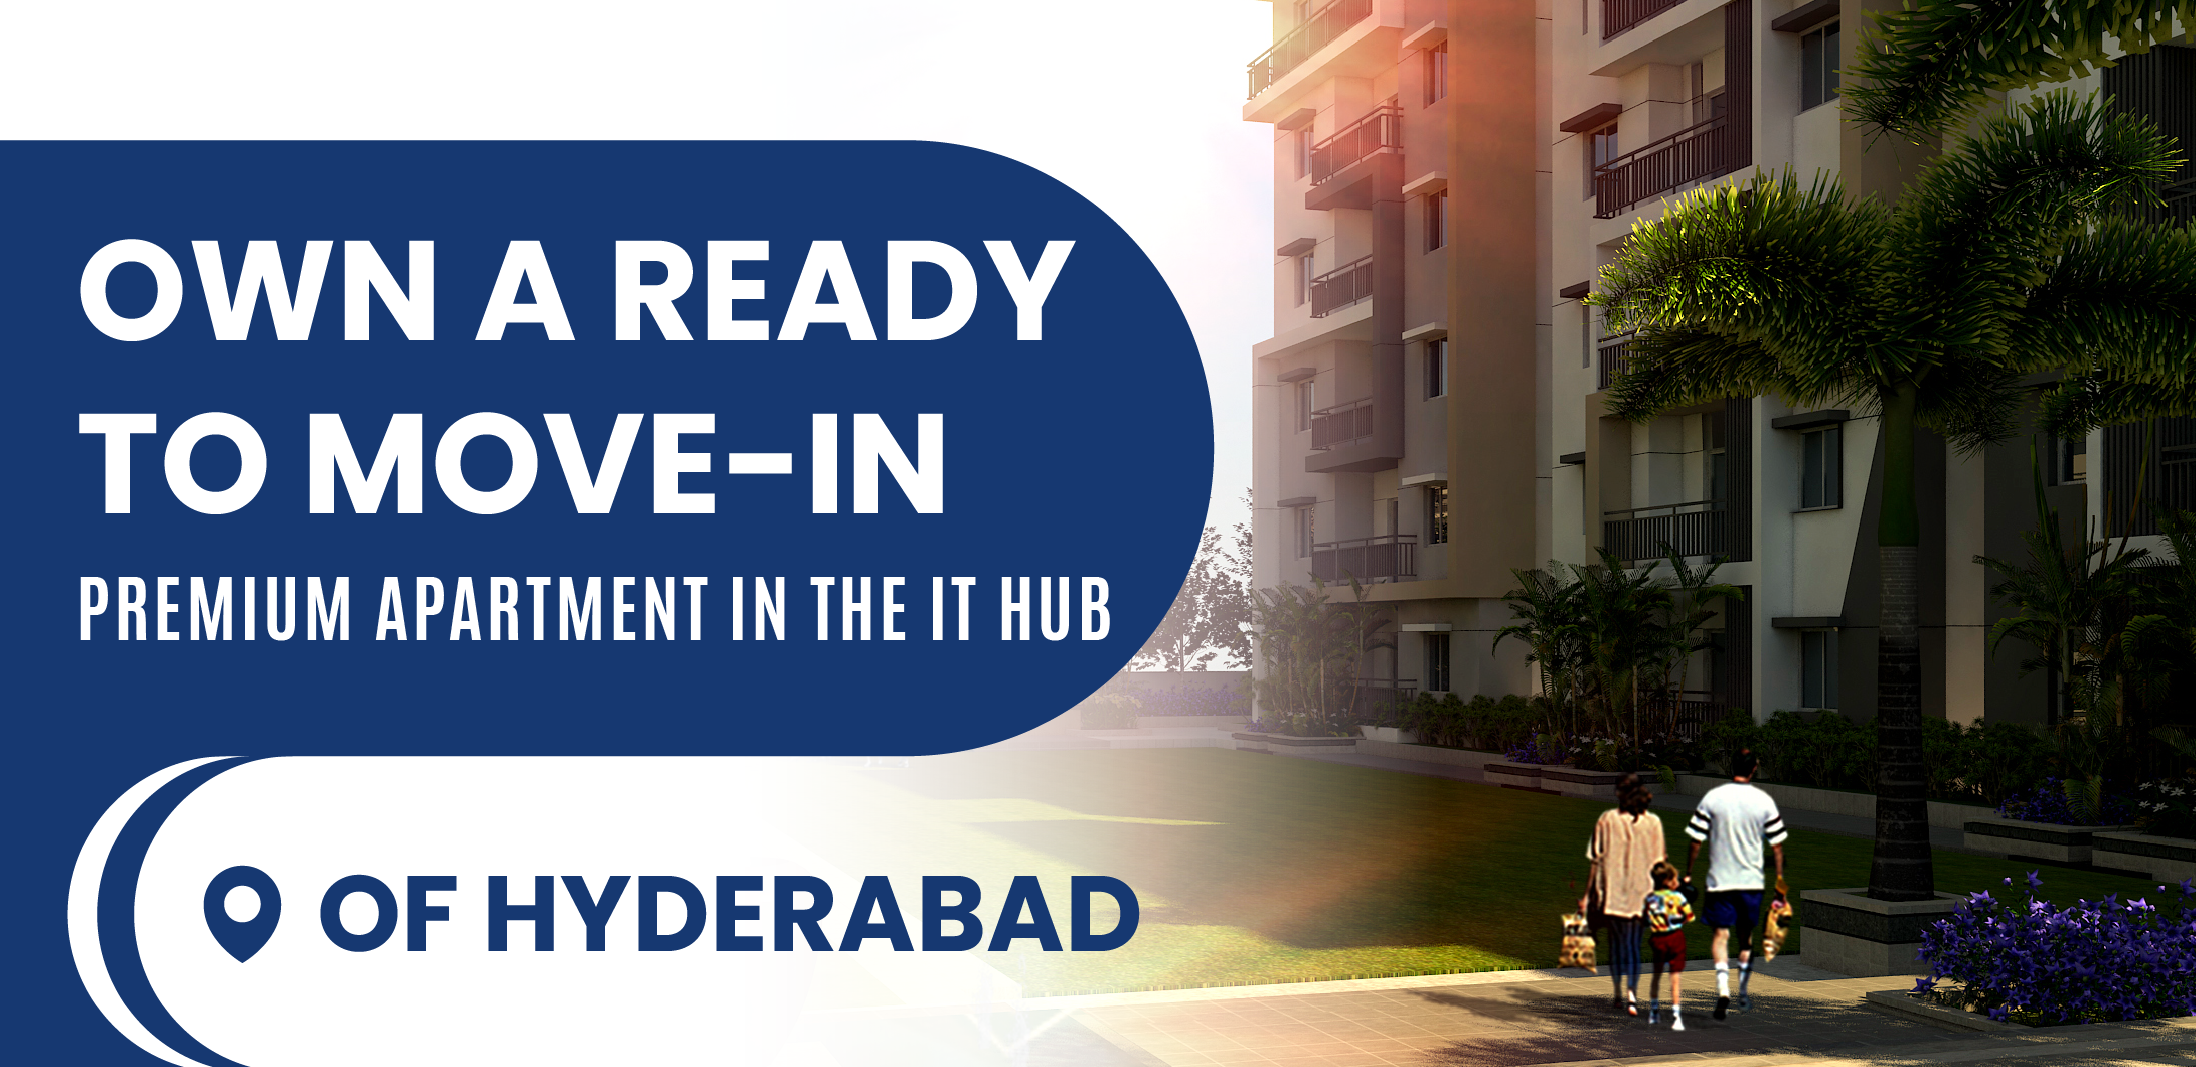 Own a Ready to Move-In Premium Apartment in the IT Hub of Hyderabad